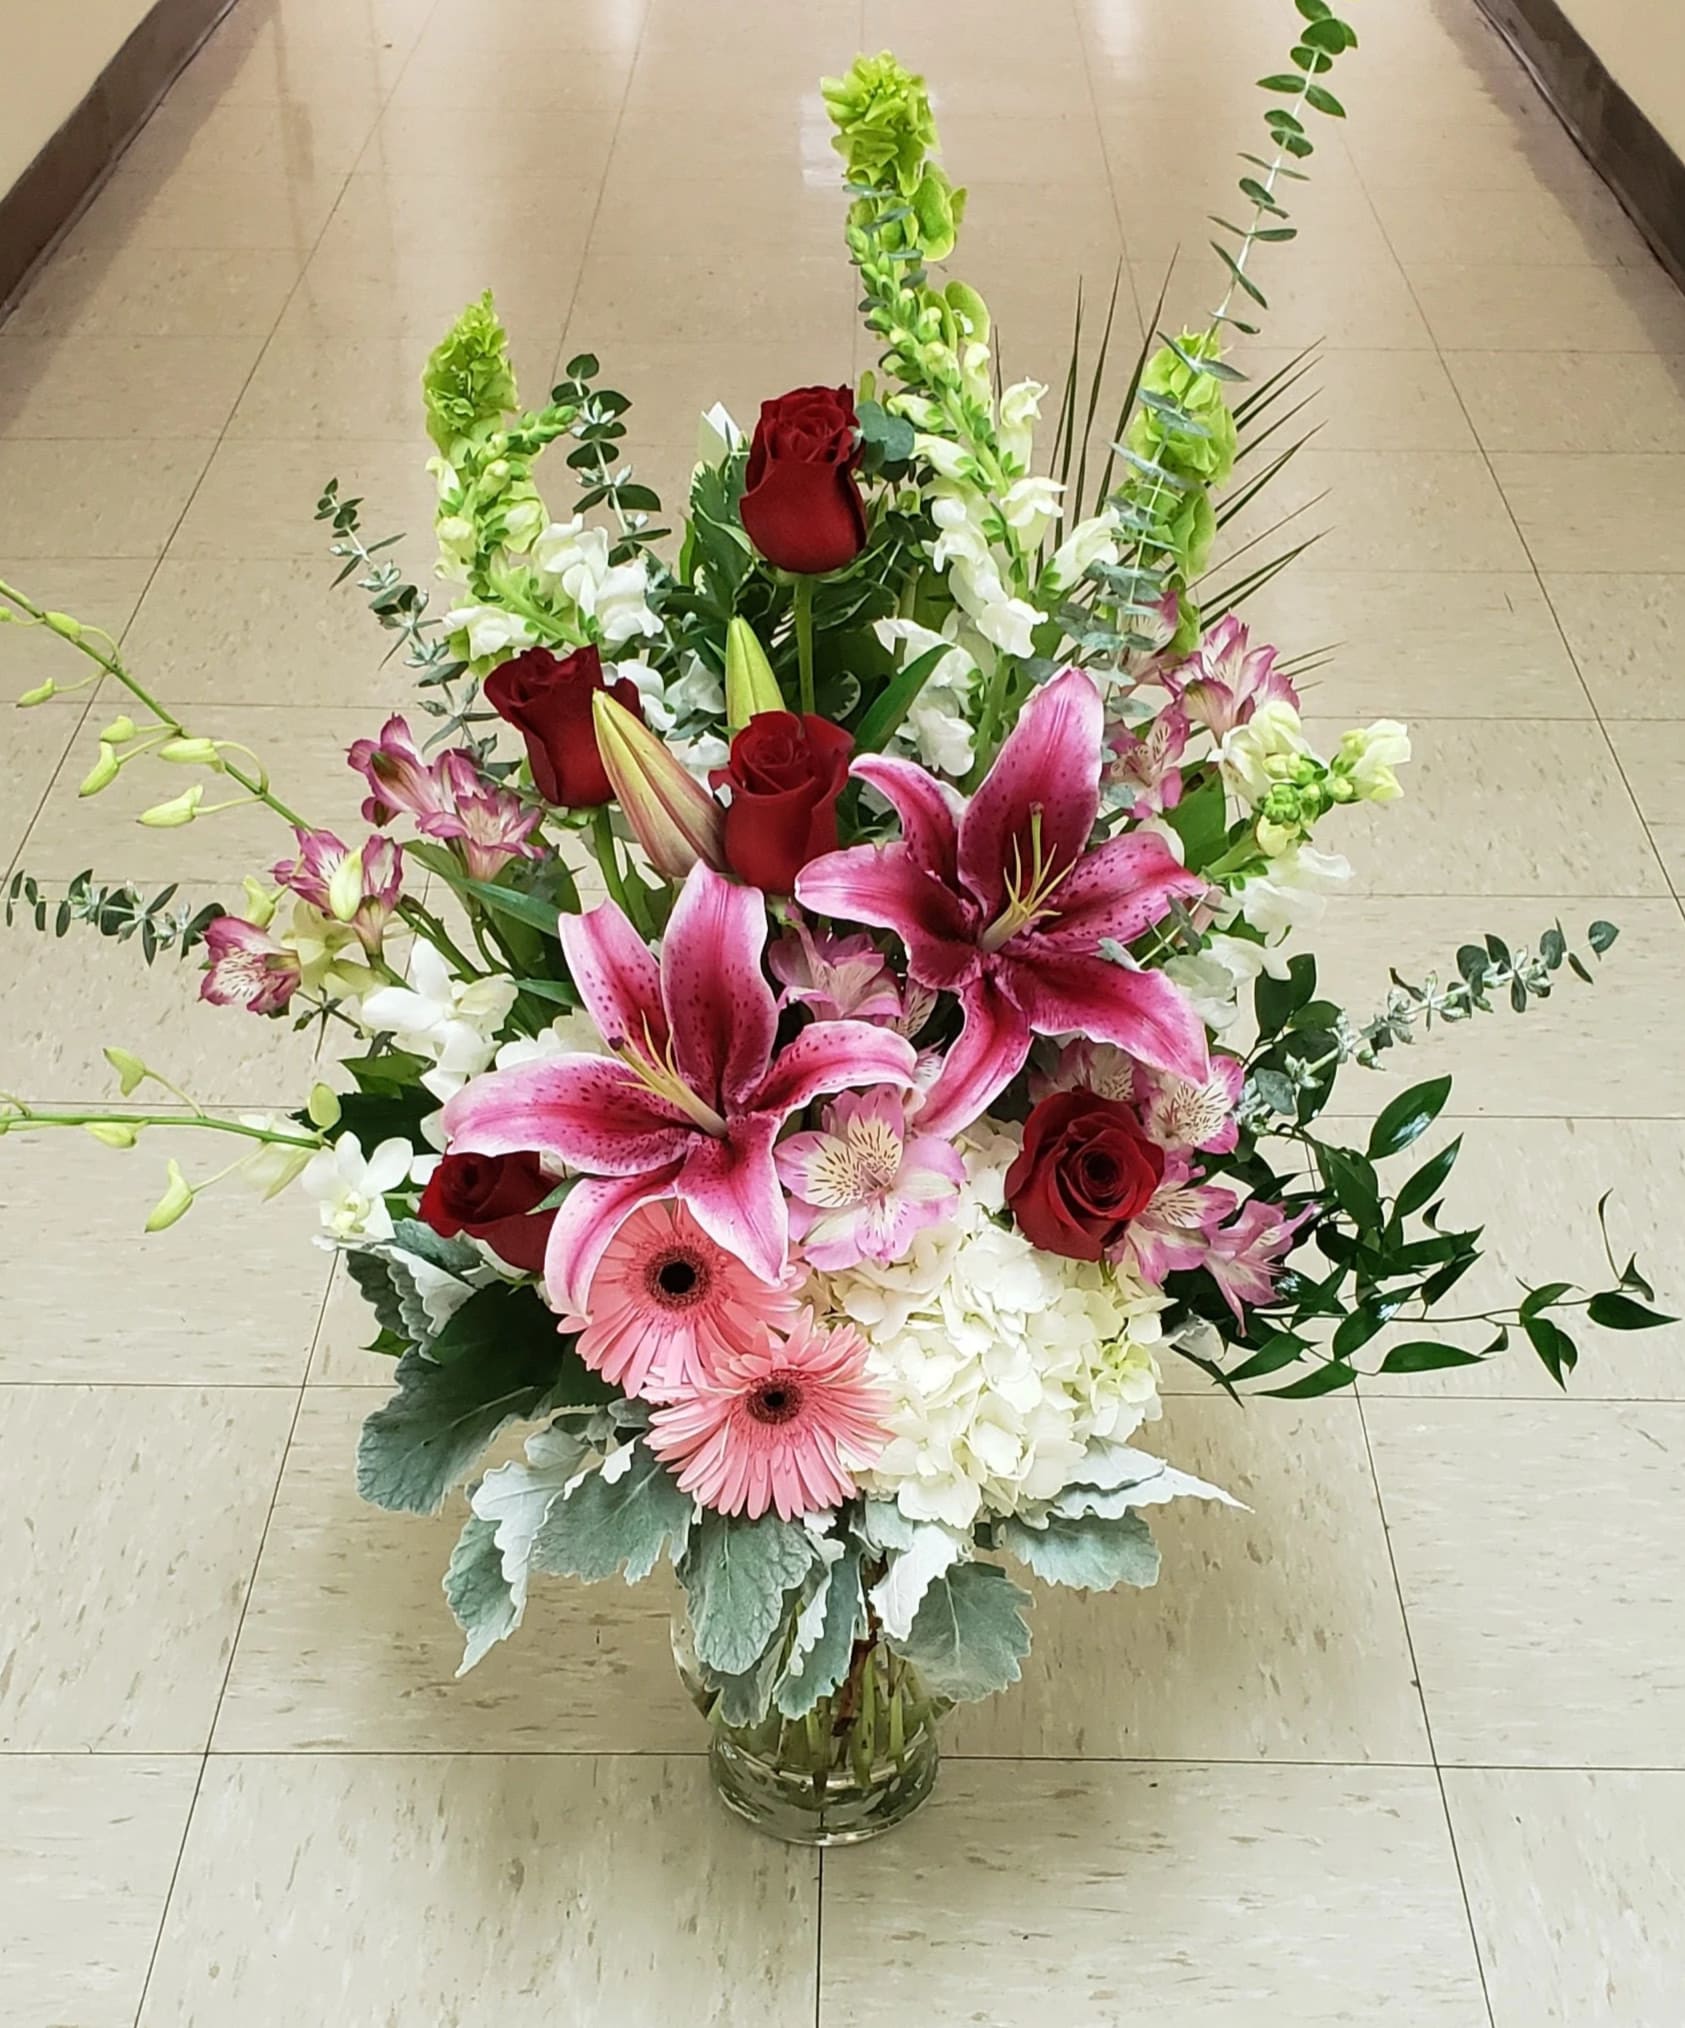 [TT-ARR63]: SULL'ARIA - Signature Classics by Twin Towers Florist ...